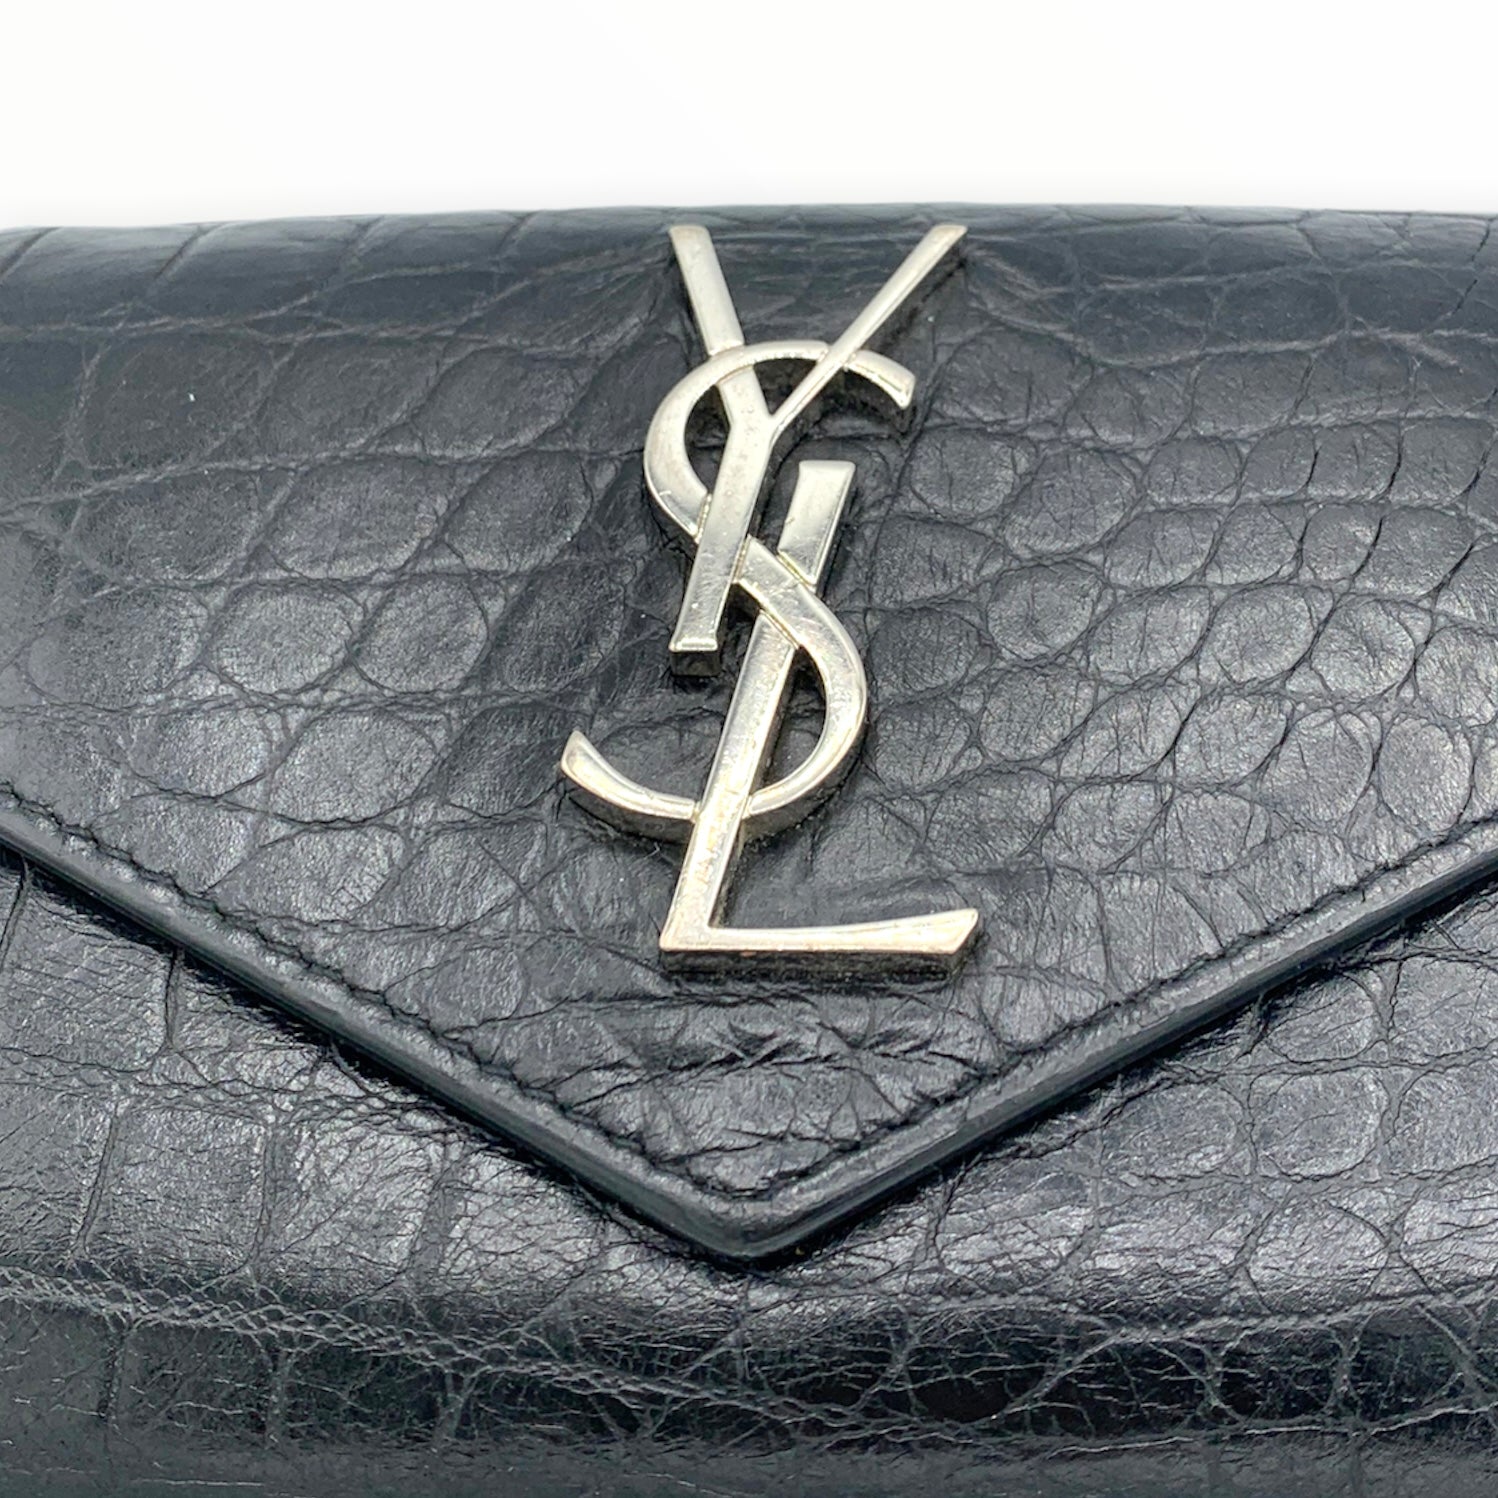 SAINT LAURENT Monogramme small quilted textured-leather wallet